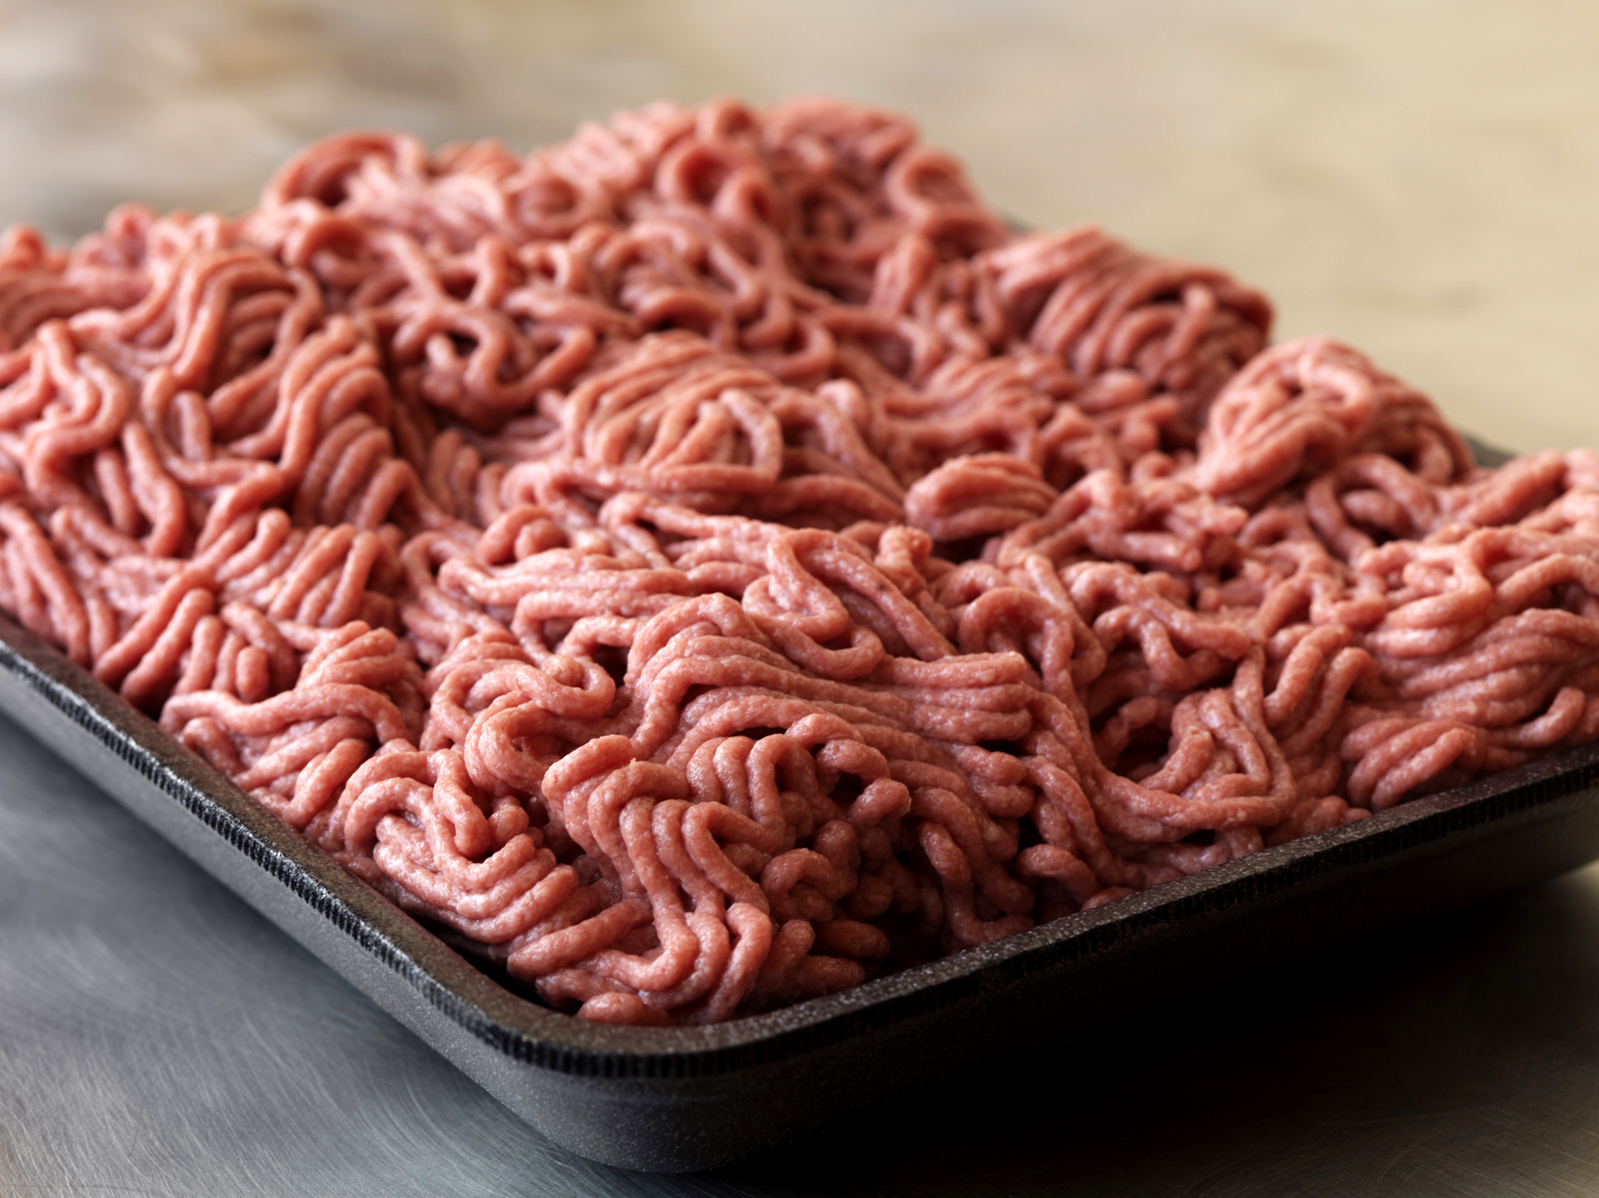 South Dakota-based meat processor Beef Products Inc. shows a sample of its lean, finely textured beef in September 2012. Photo: AP